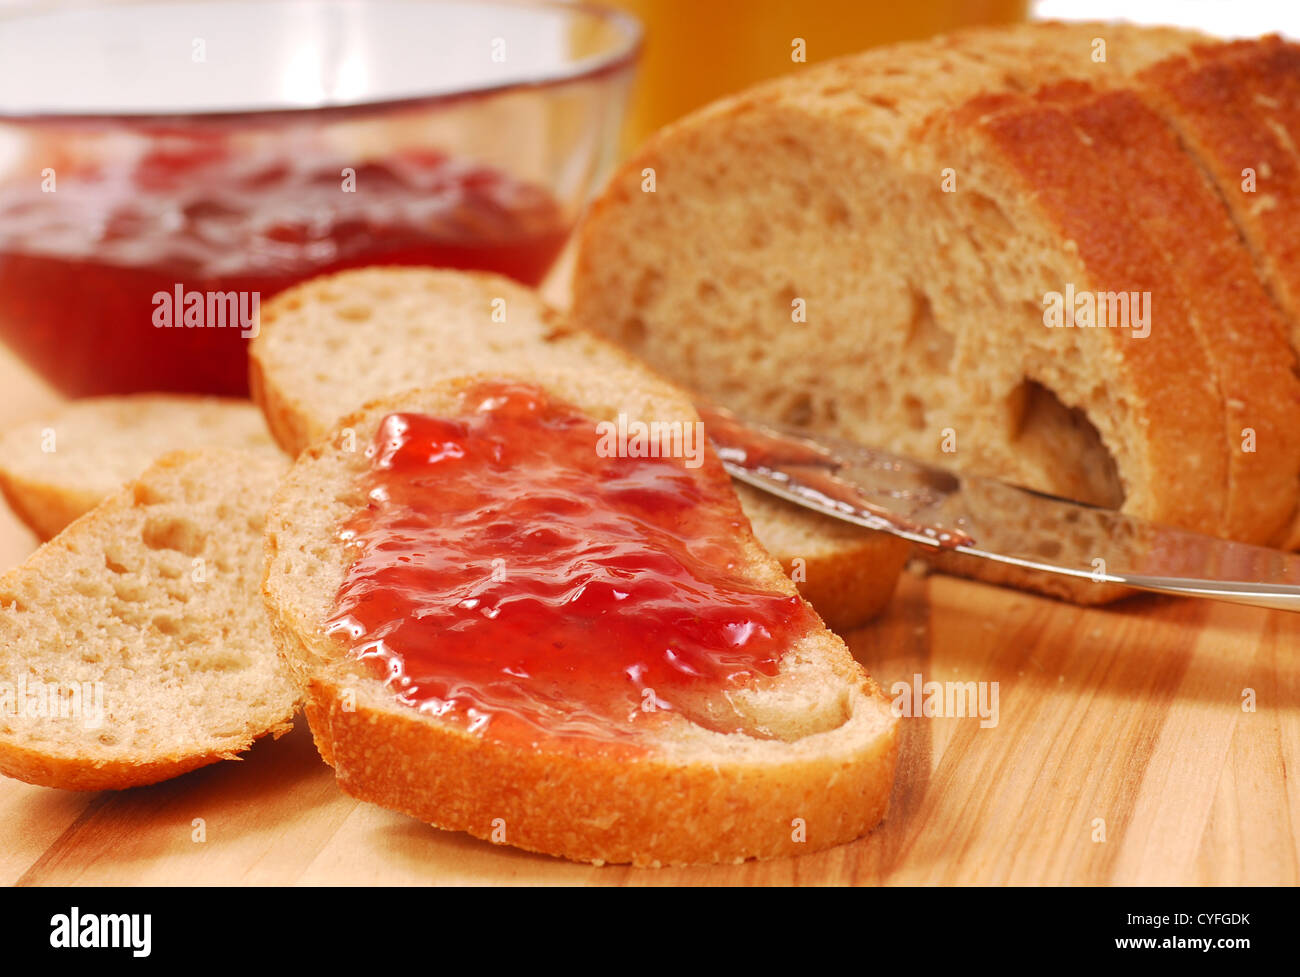 Delicious freshly baked bread with strawberry preserves and orange juice Stock Photo